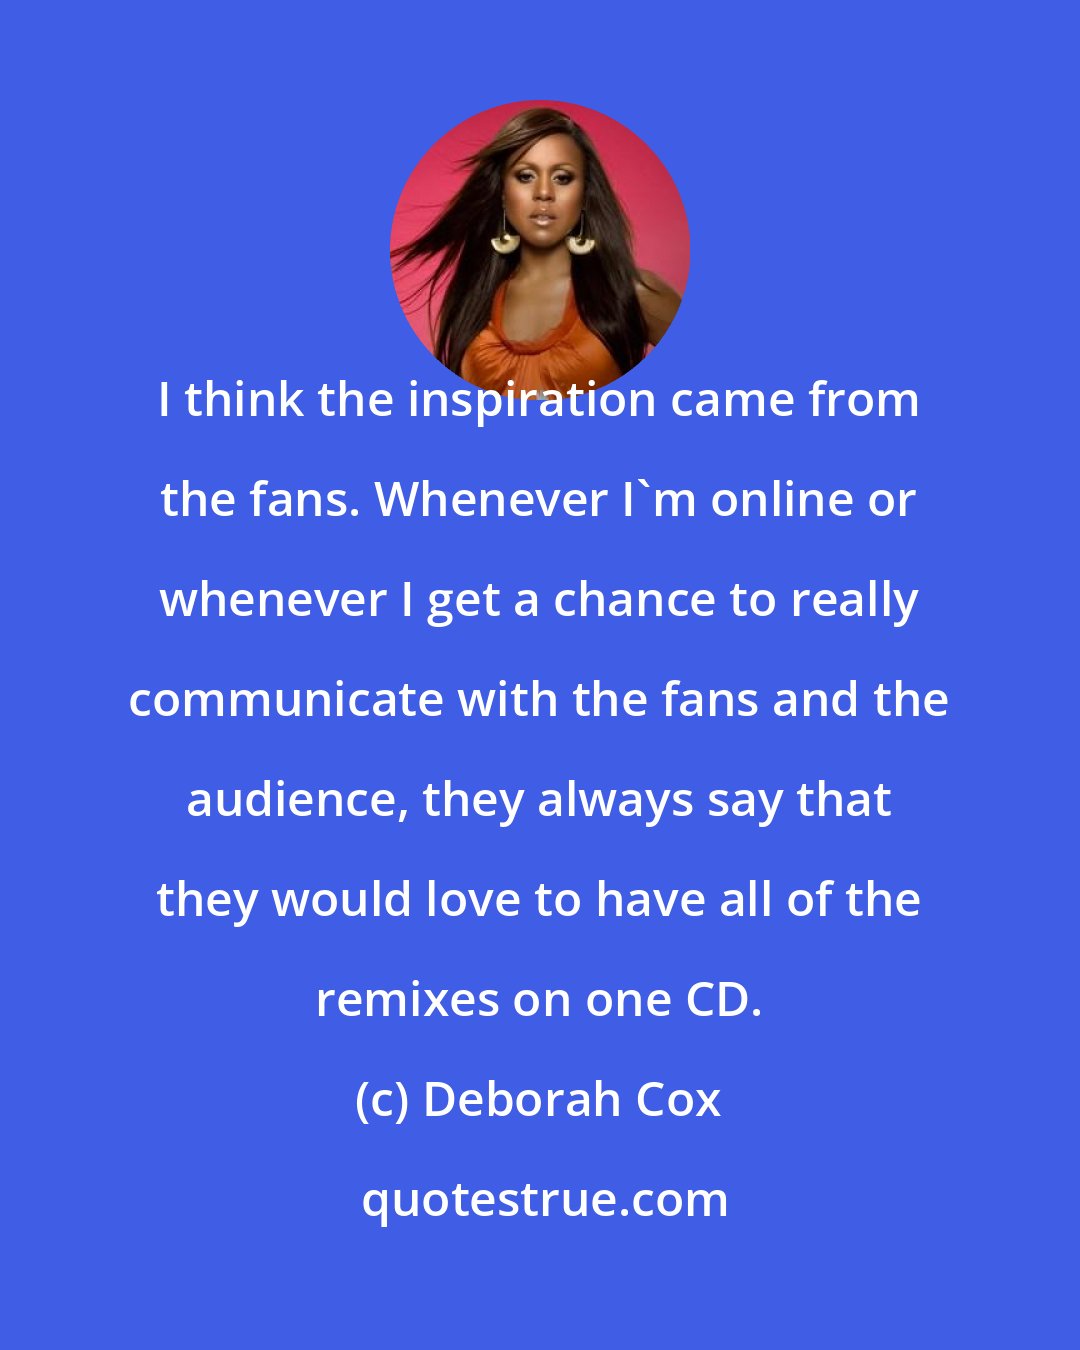 Deborah Cox: I think the inspiration came from the fans. Whenever I'm online or whenever I get a chance to really communicate with the fans and the audience, they always say that they would love to have all of the remixes on one CD.